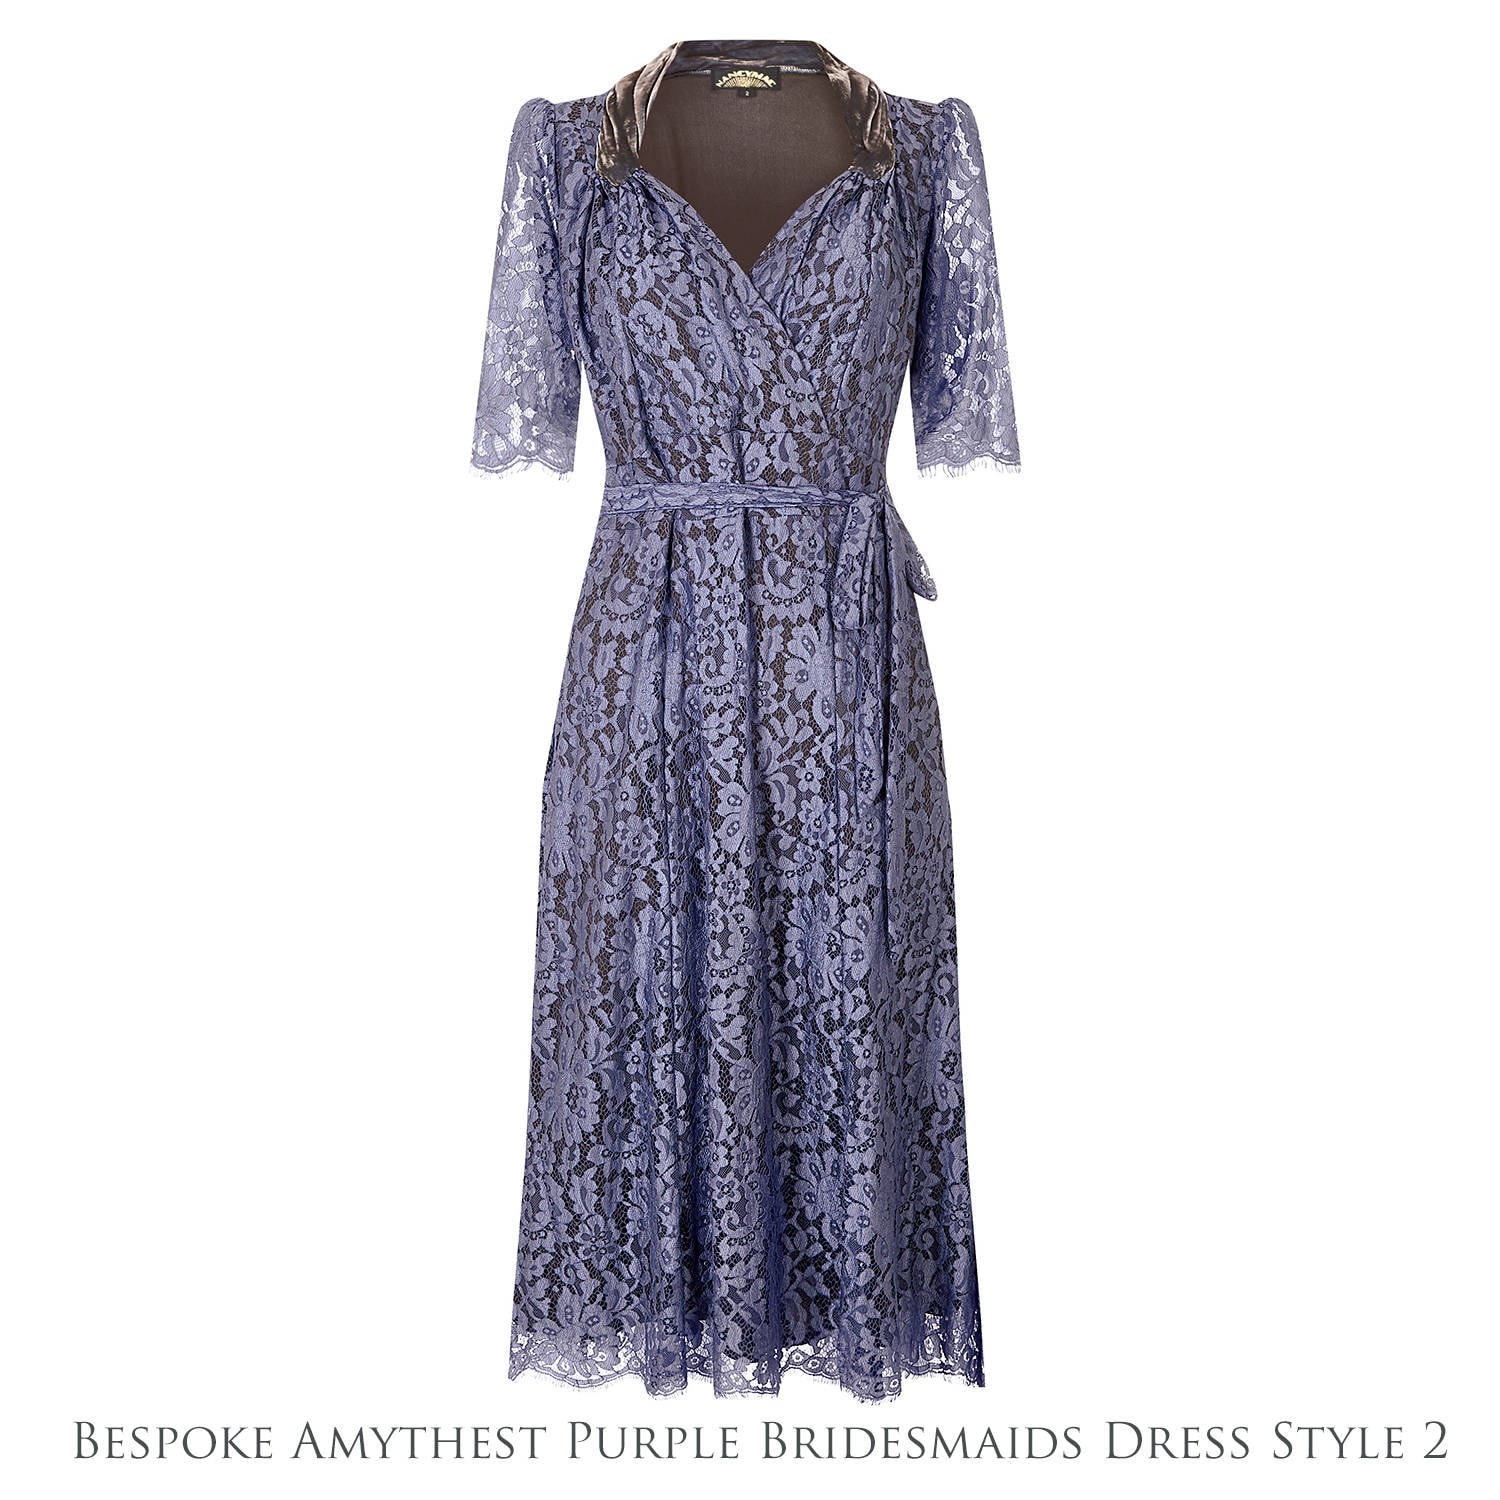 Bespoke Vintage Style Bridesmaid Dresses in Amethyst Lace With - Etsy UK